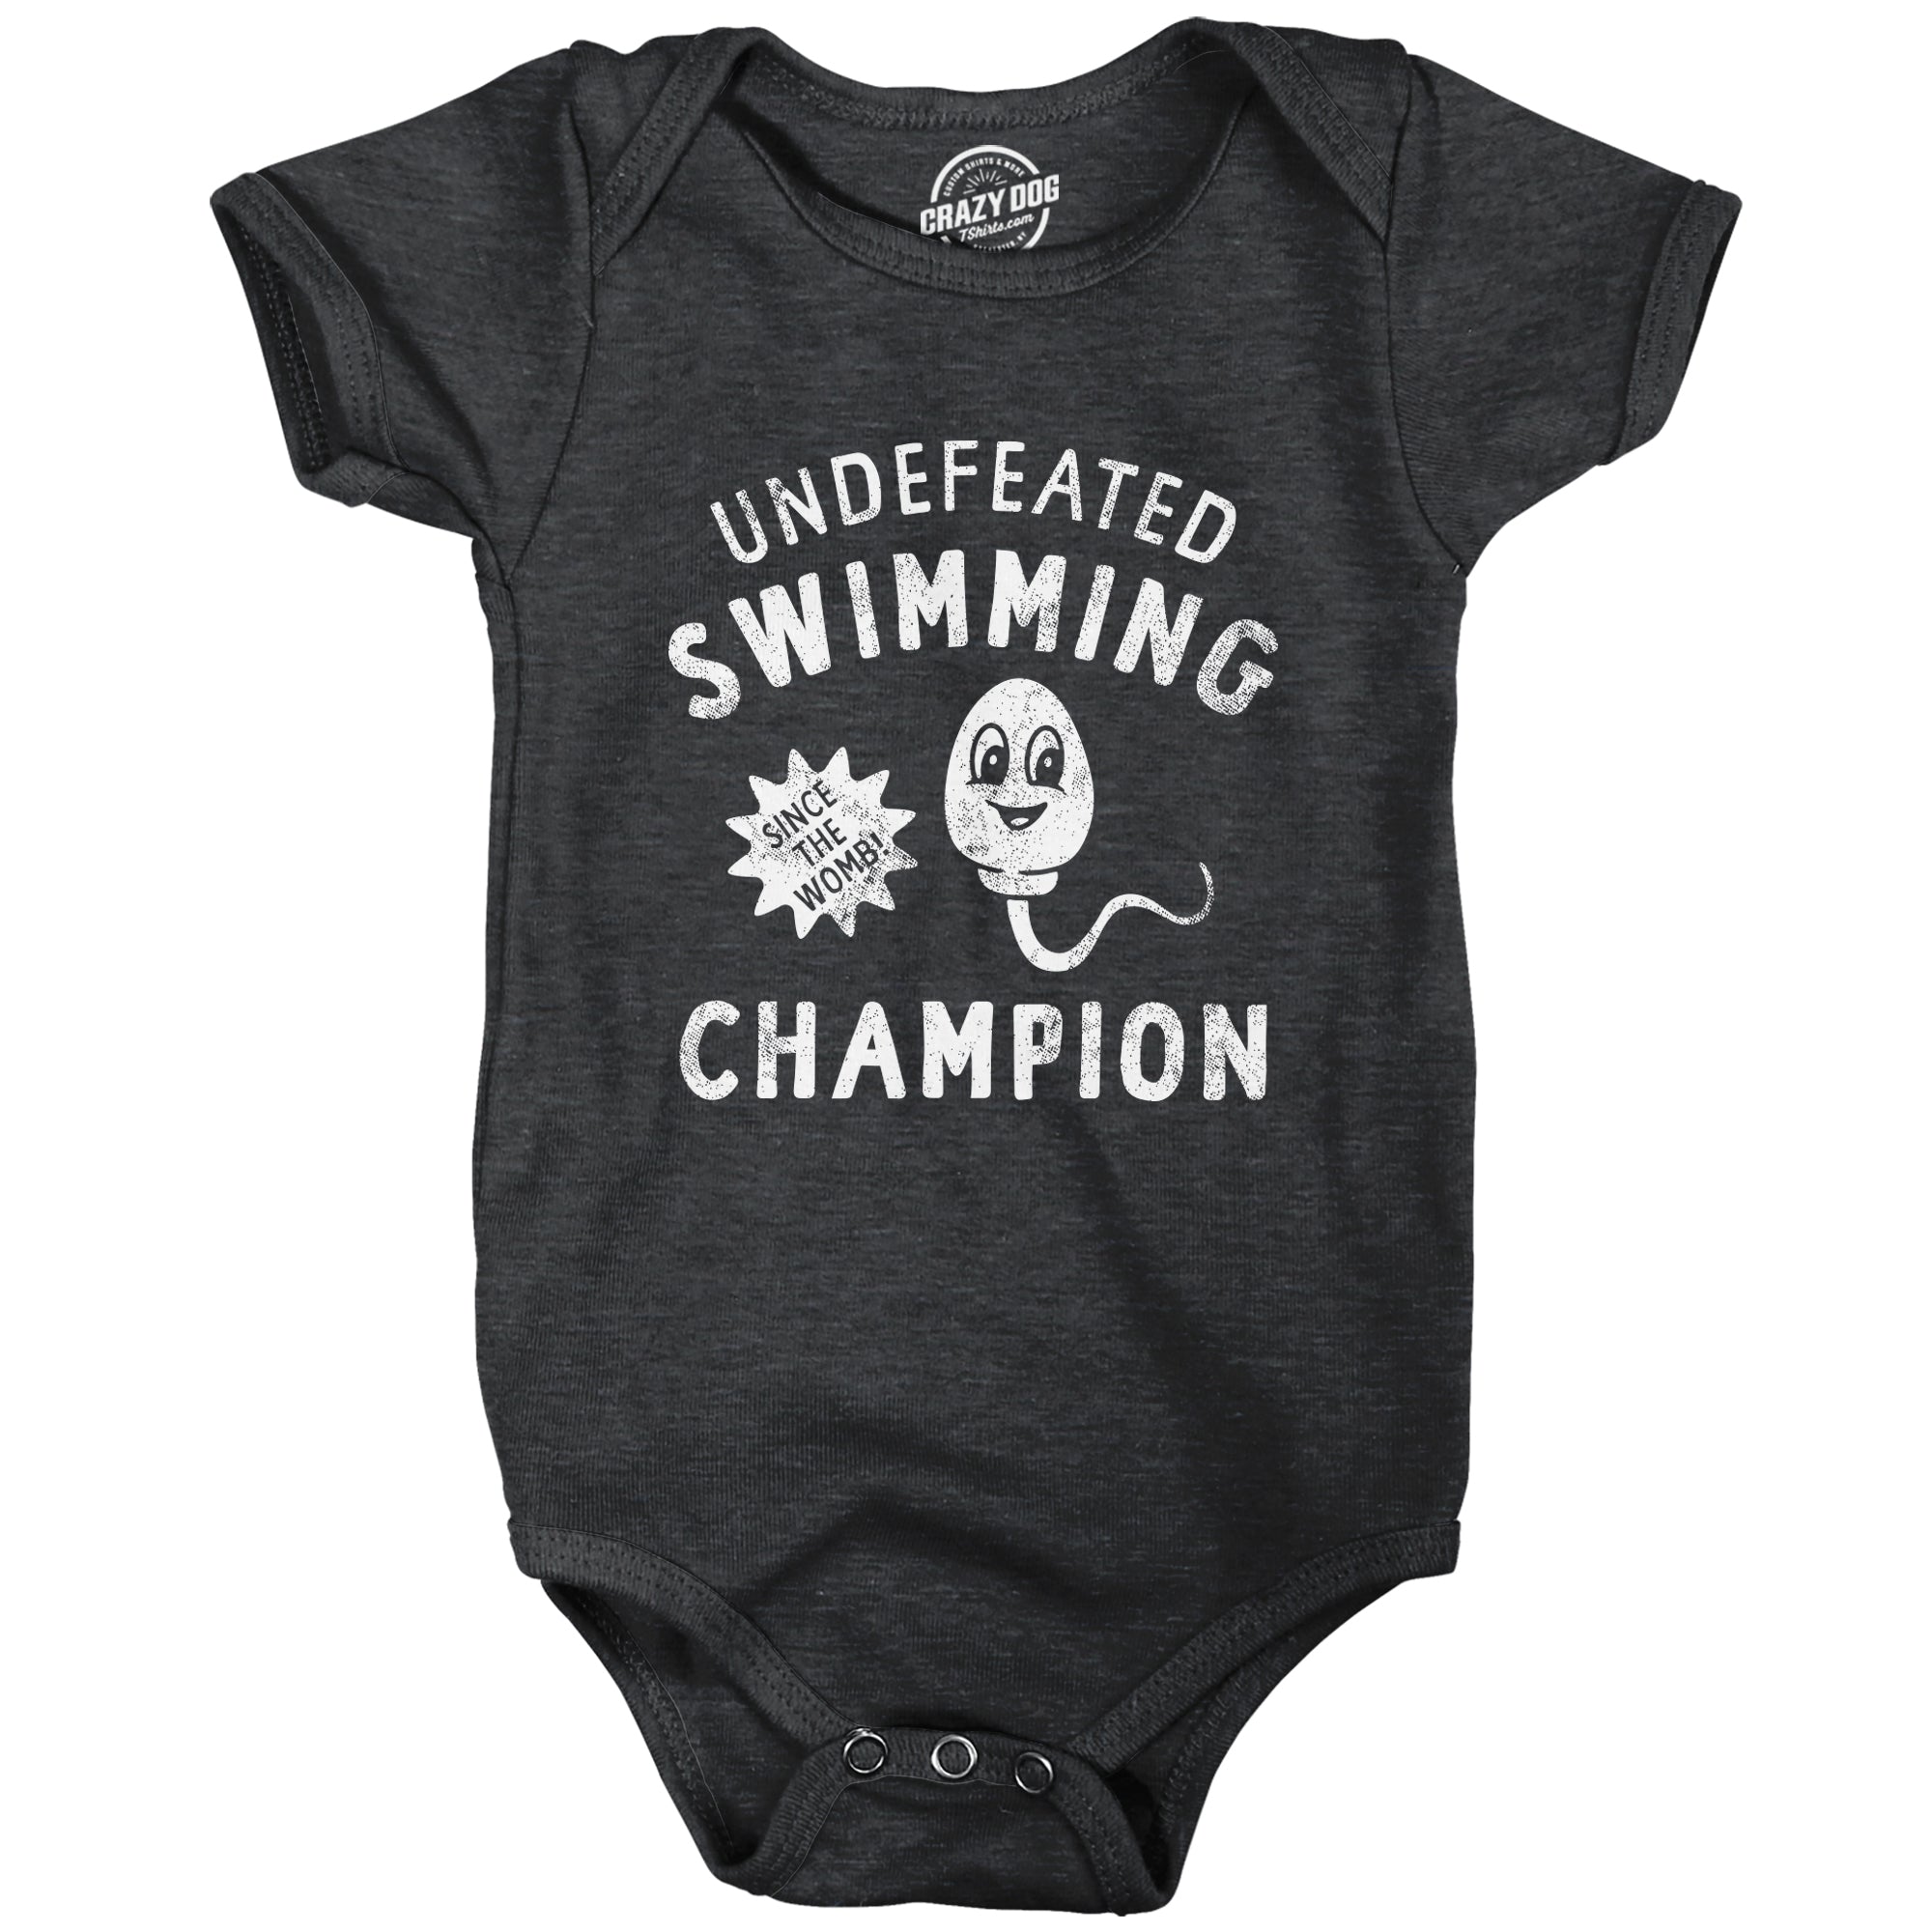 Funny Heather Black - SWIMMING Undefeated Swimming Champion Onesie Nerdy Sarcastic Tee